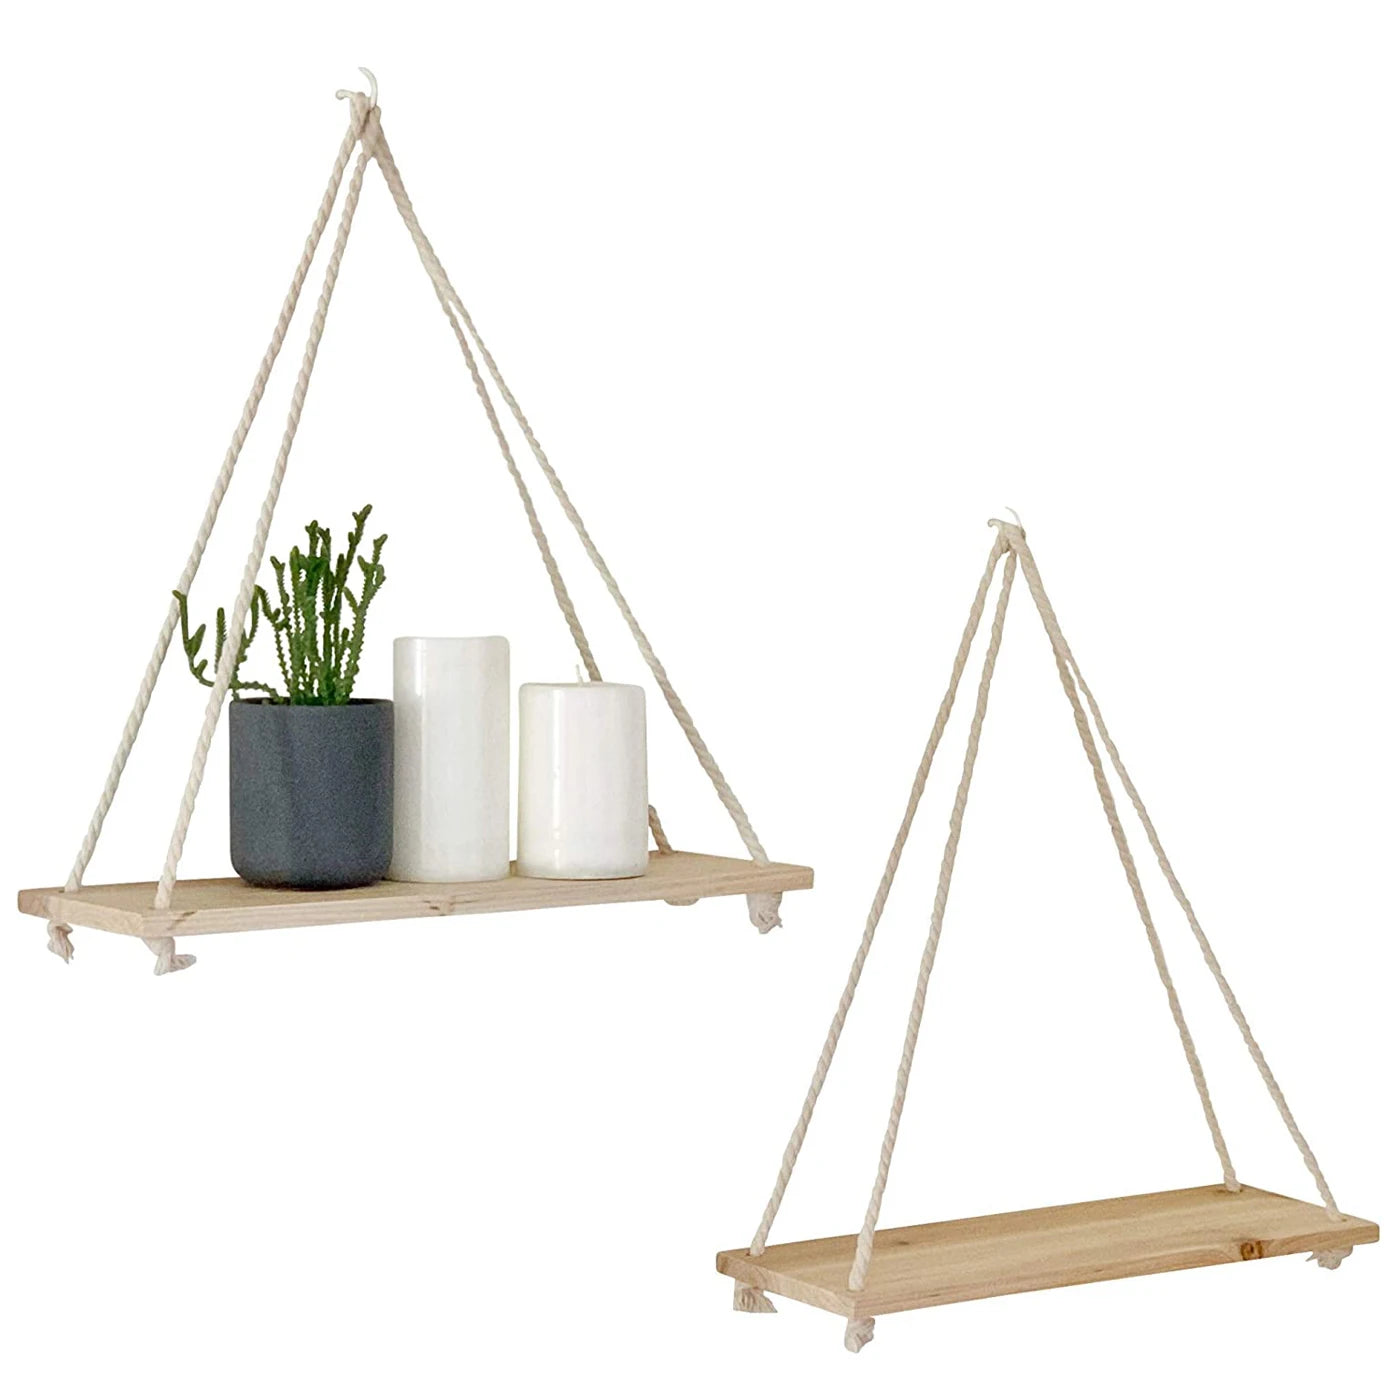 Wooden Rope Wall Hanging Shelve